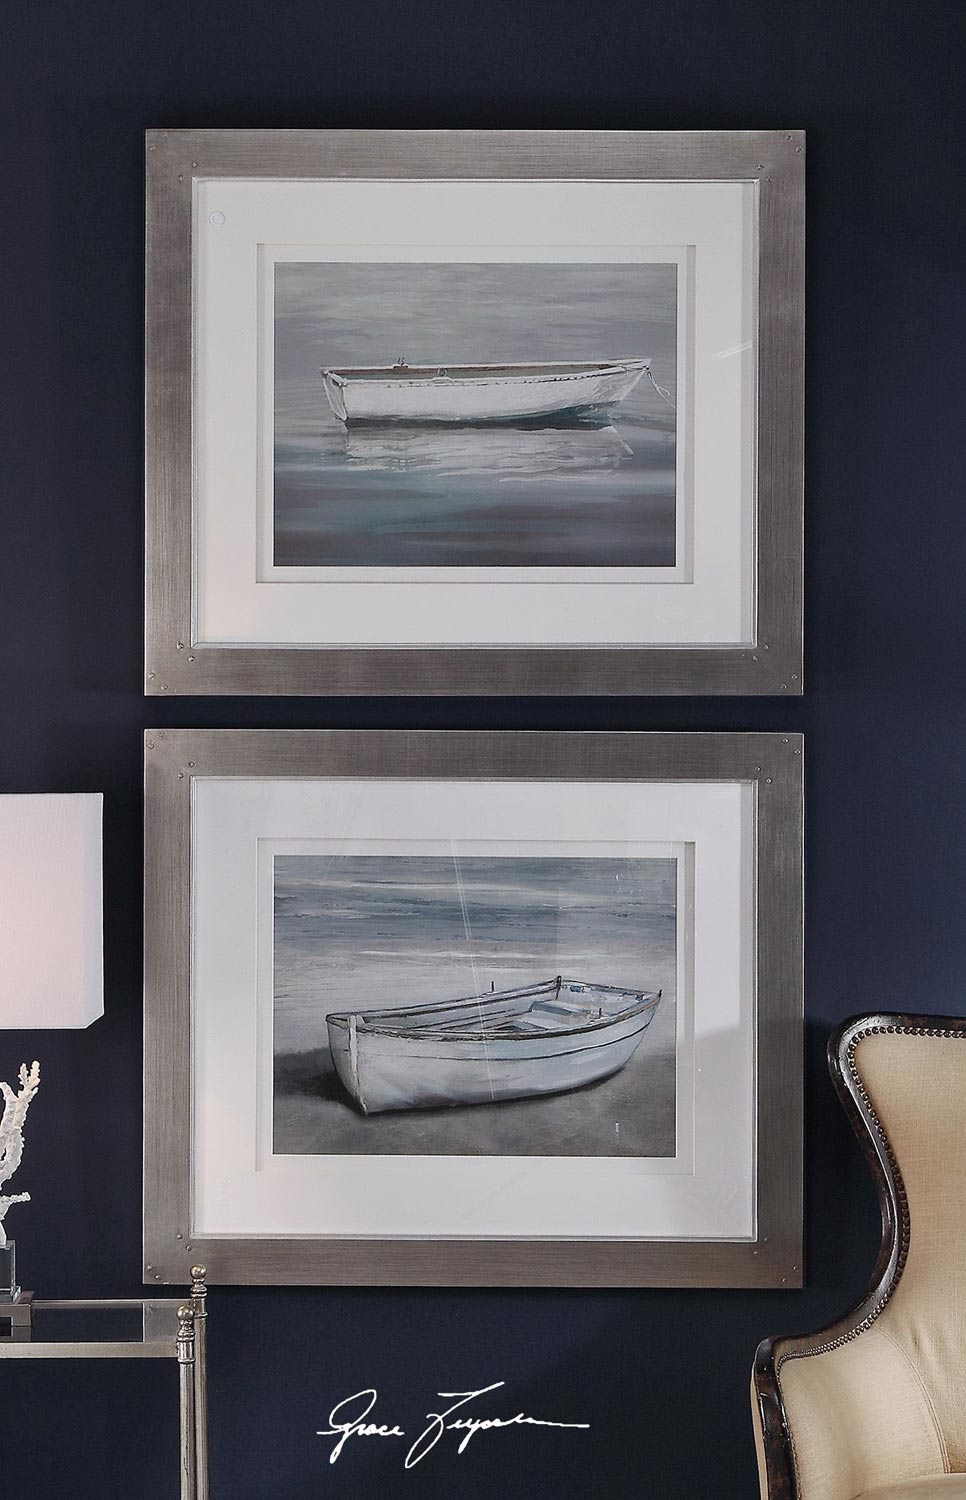 Uttermost Anchored By The Beach Framed Prints - Set of 2